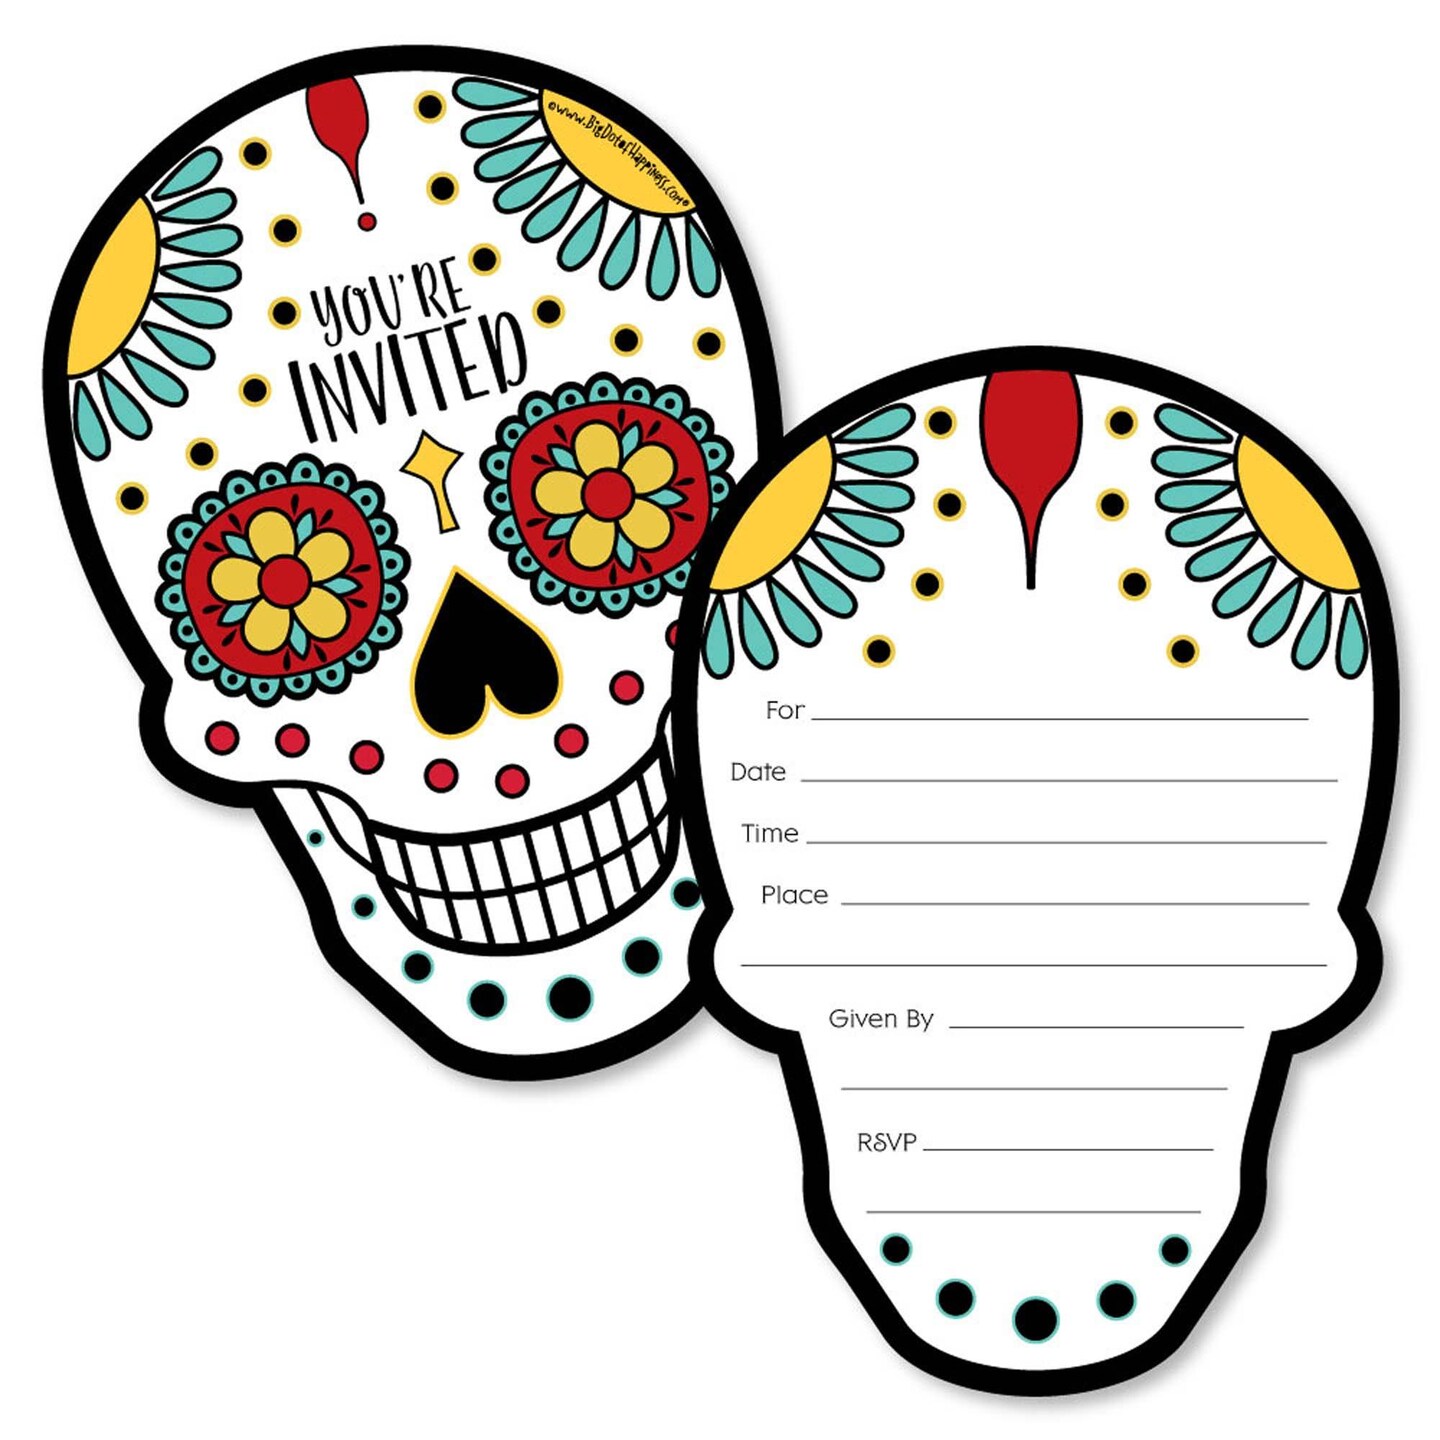 Big Dot of Happiness Day of the Dead - Shaped Fill-in Invitations - Sugar Skull Party Invitation Cards with Envelopes - Set of 12